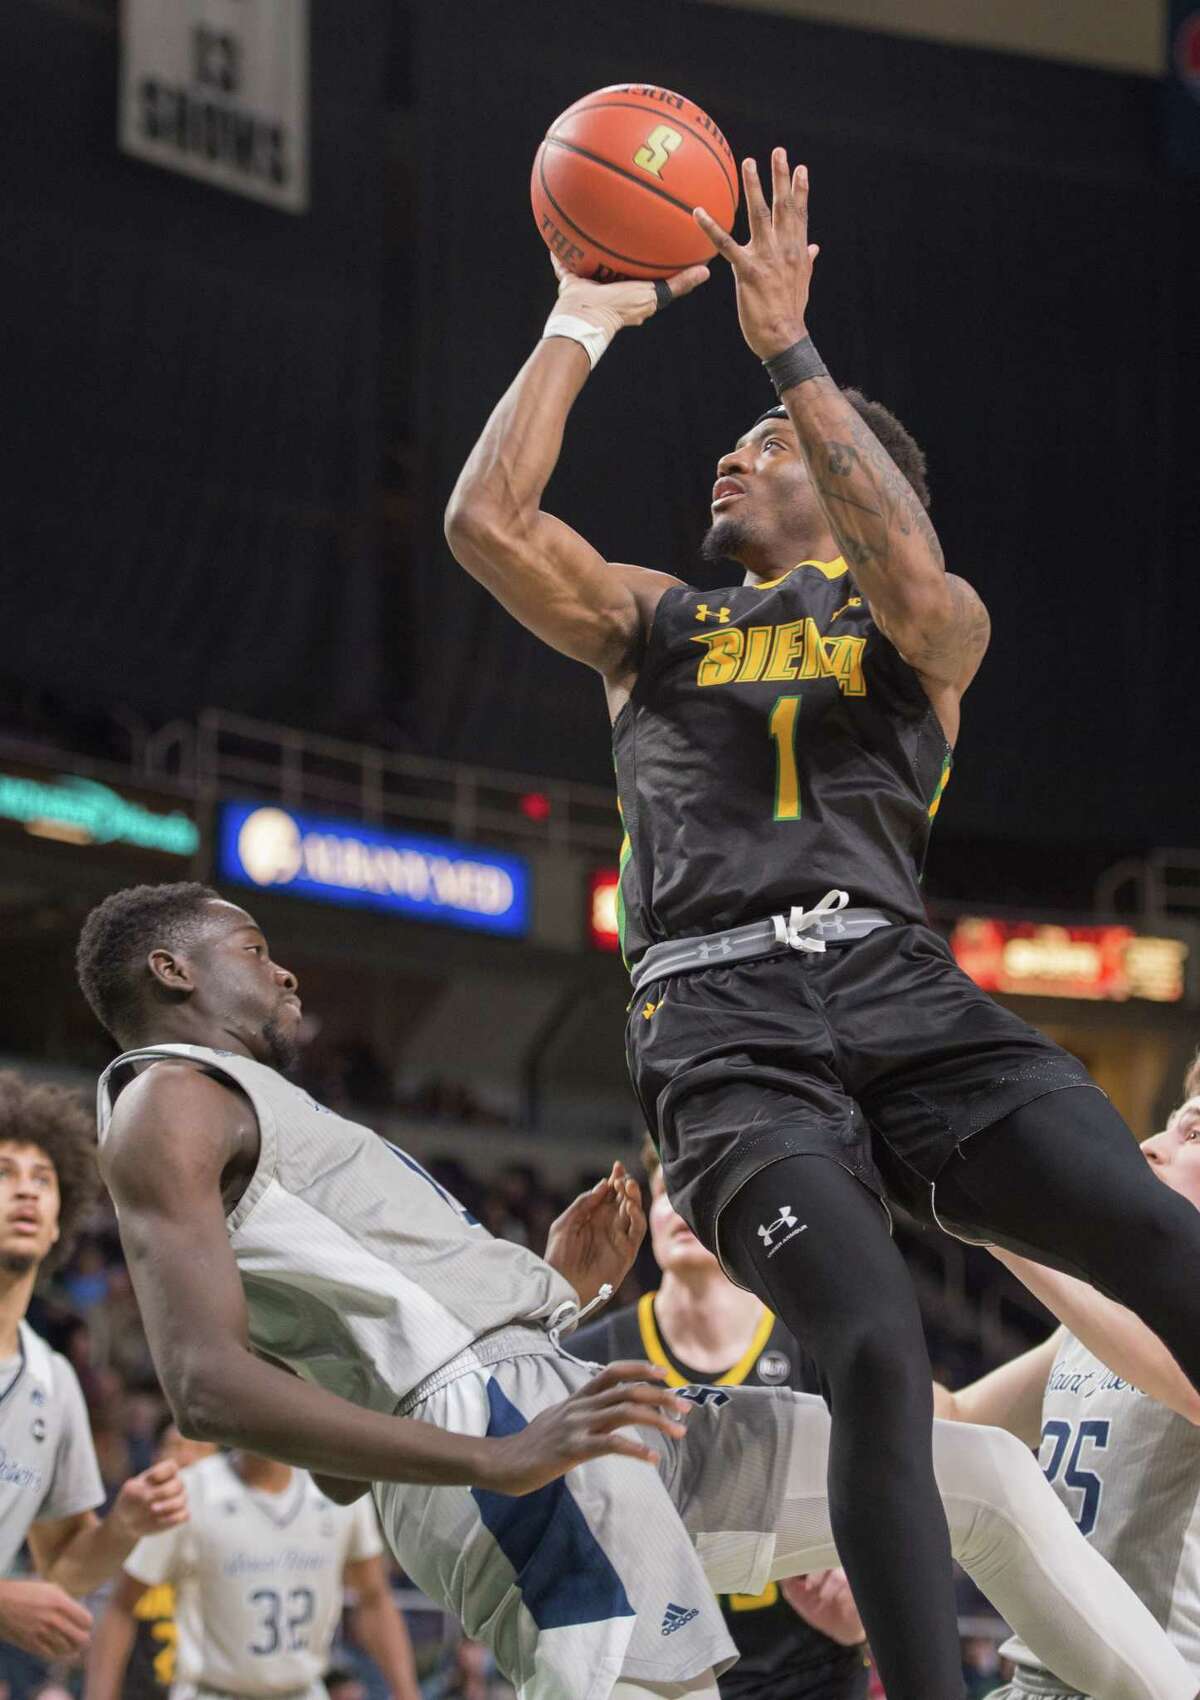 Siena guard Jared Billups shoots the ball as he bumps St. Peter’s forward Hasan Drame during a game on Sunday, Feb. 20, 2022 at MVP Arena in Albany, N.Y. (Jenn March, Special to the Times Union)